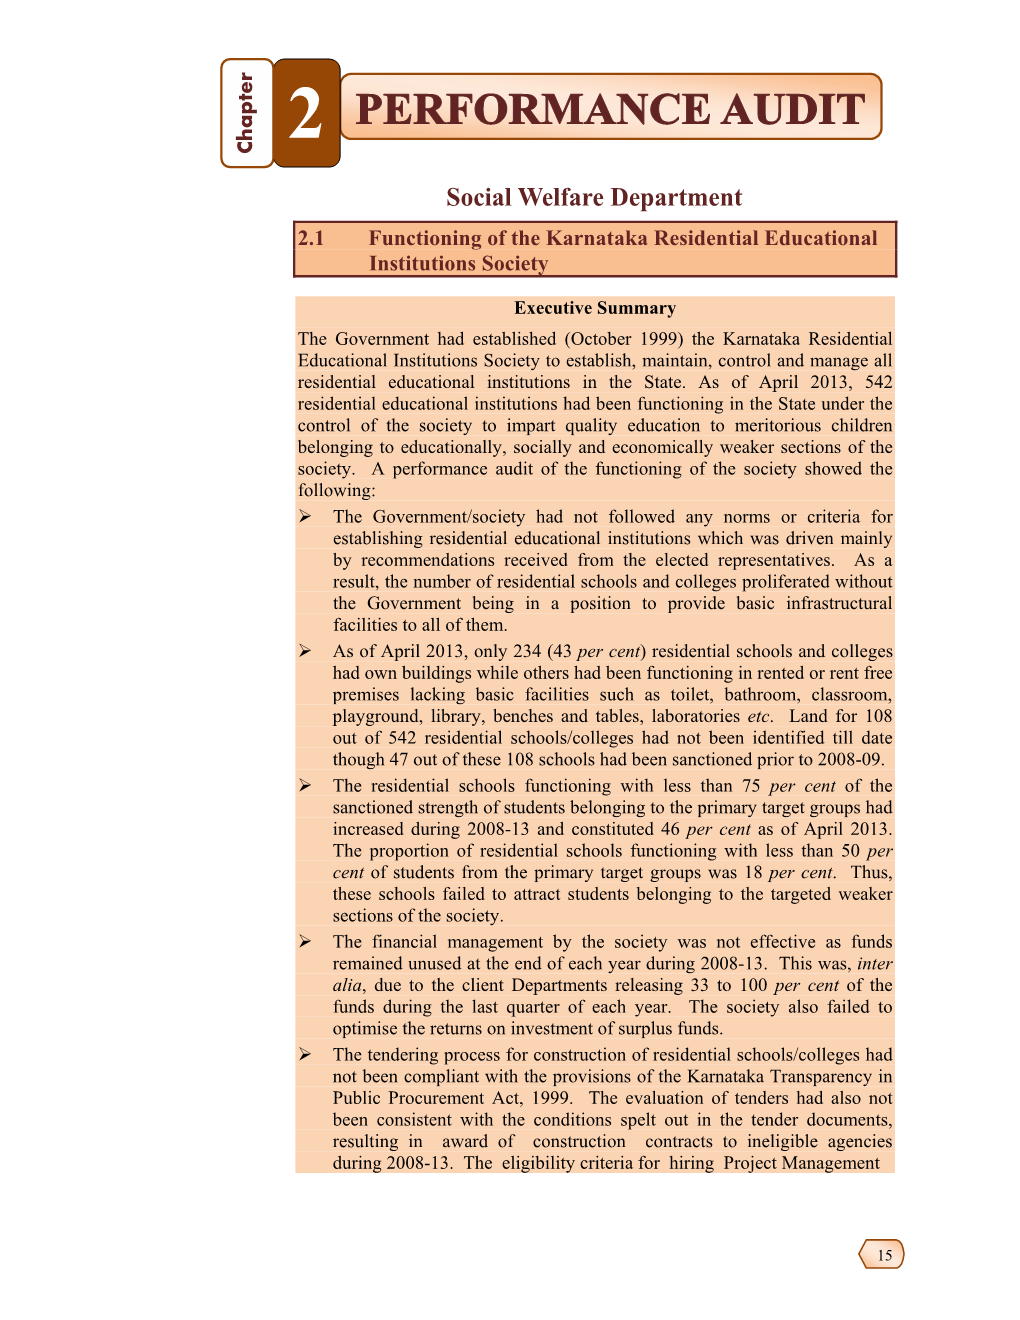 2.1 Functioning of the Karnataka Residential Educational Institutions Society